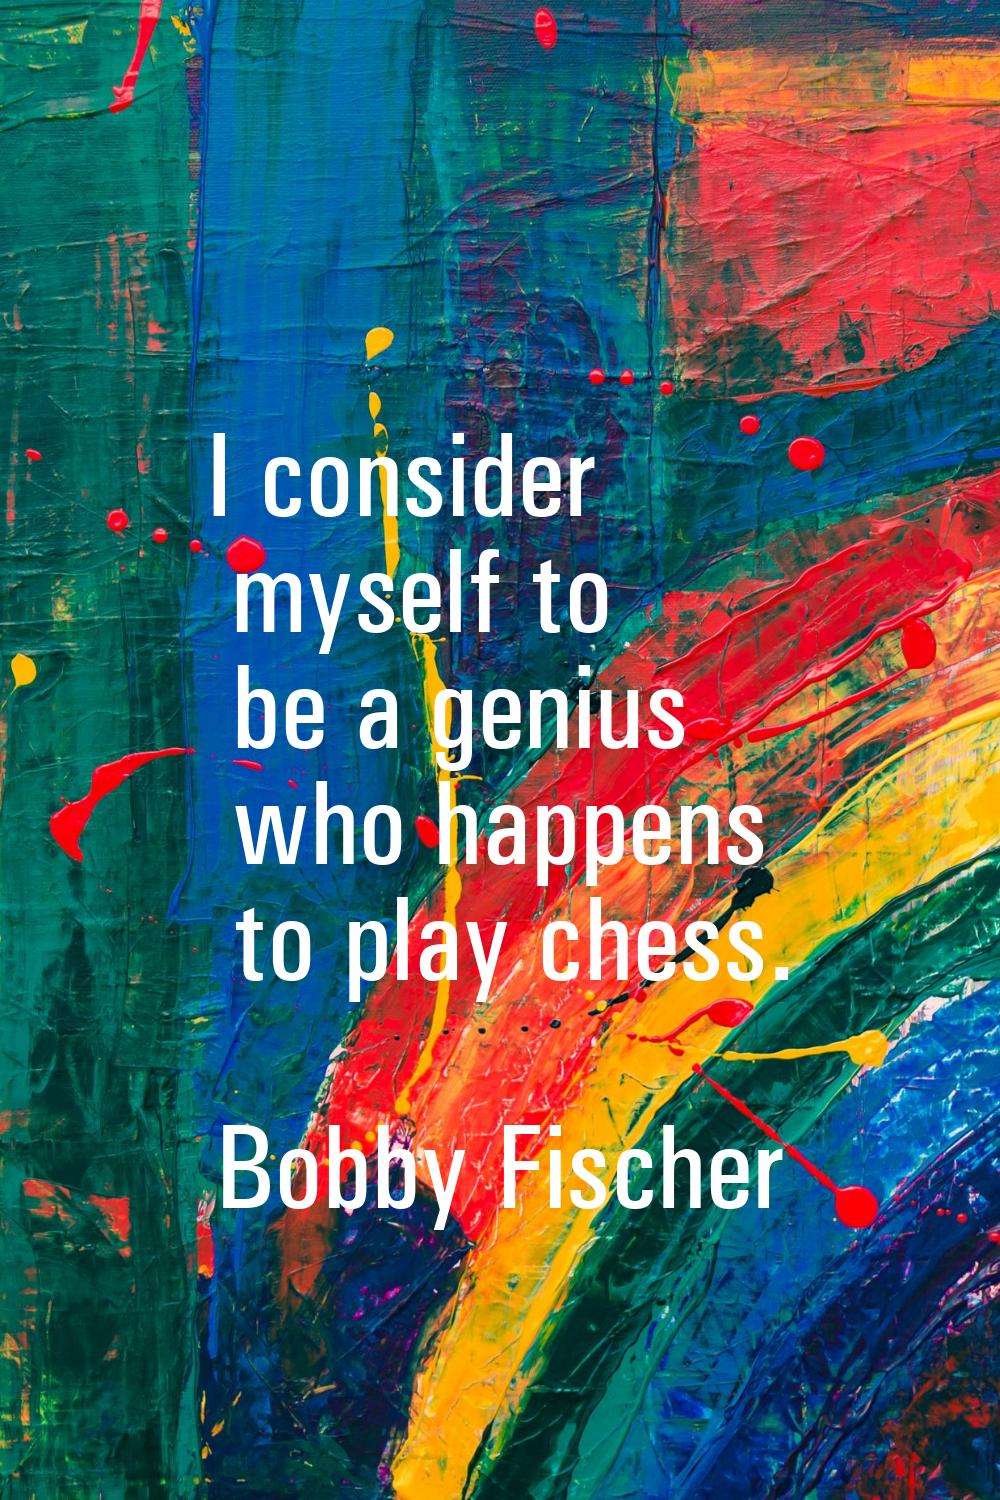 I consider myself to be a genius who happens to play chess.